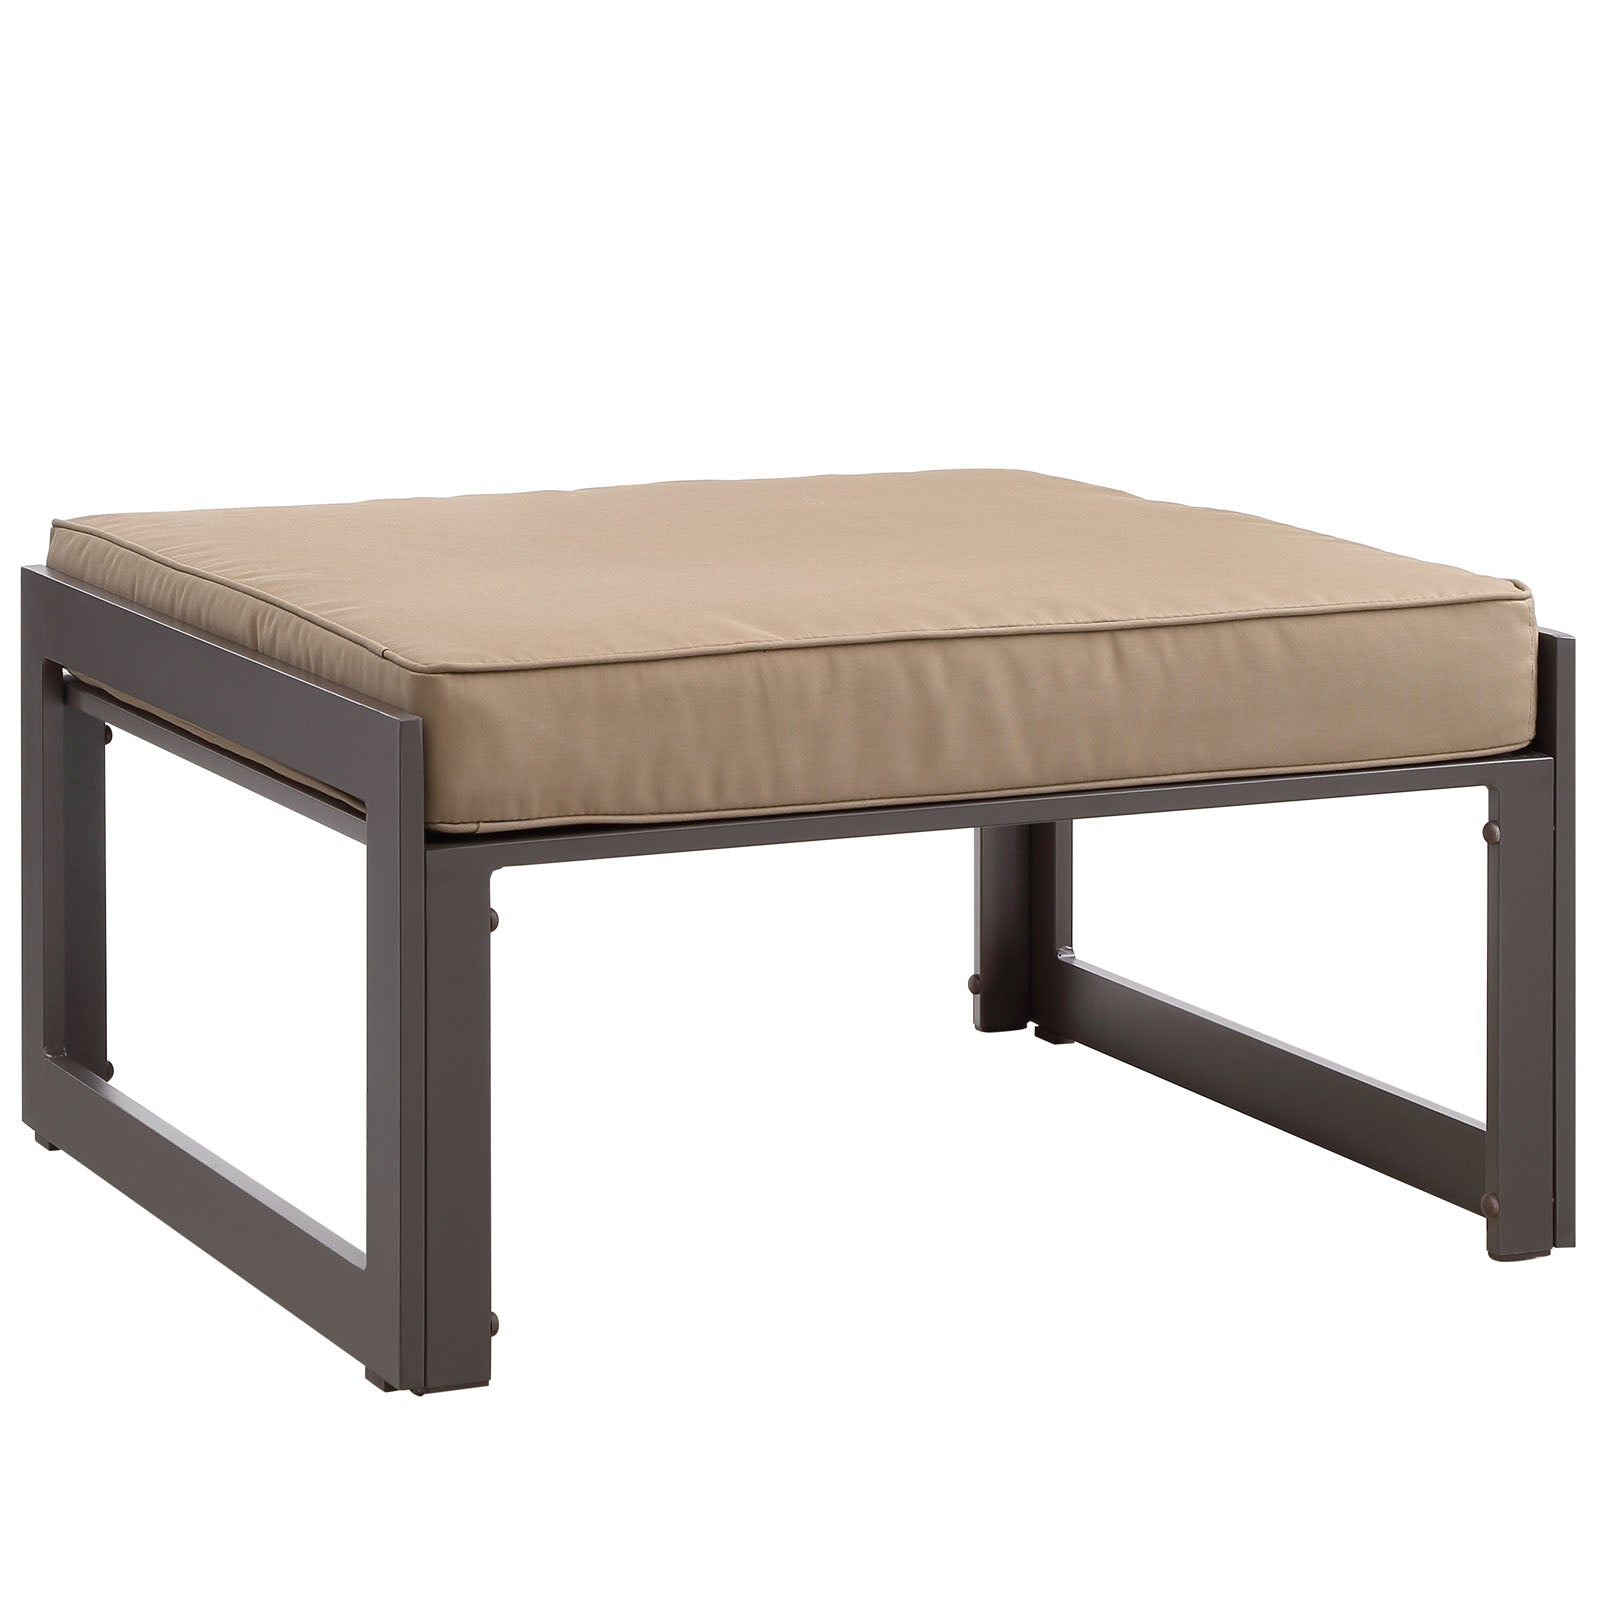 Modway Outdoor Stools & Benches - Fortuna Outdoor Ottoman Brown & Mocha